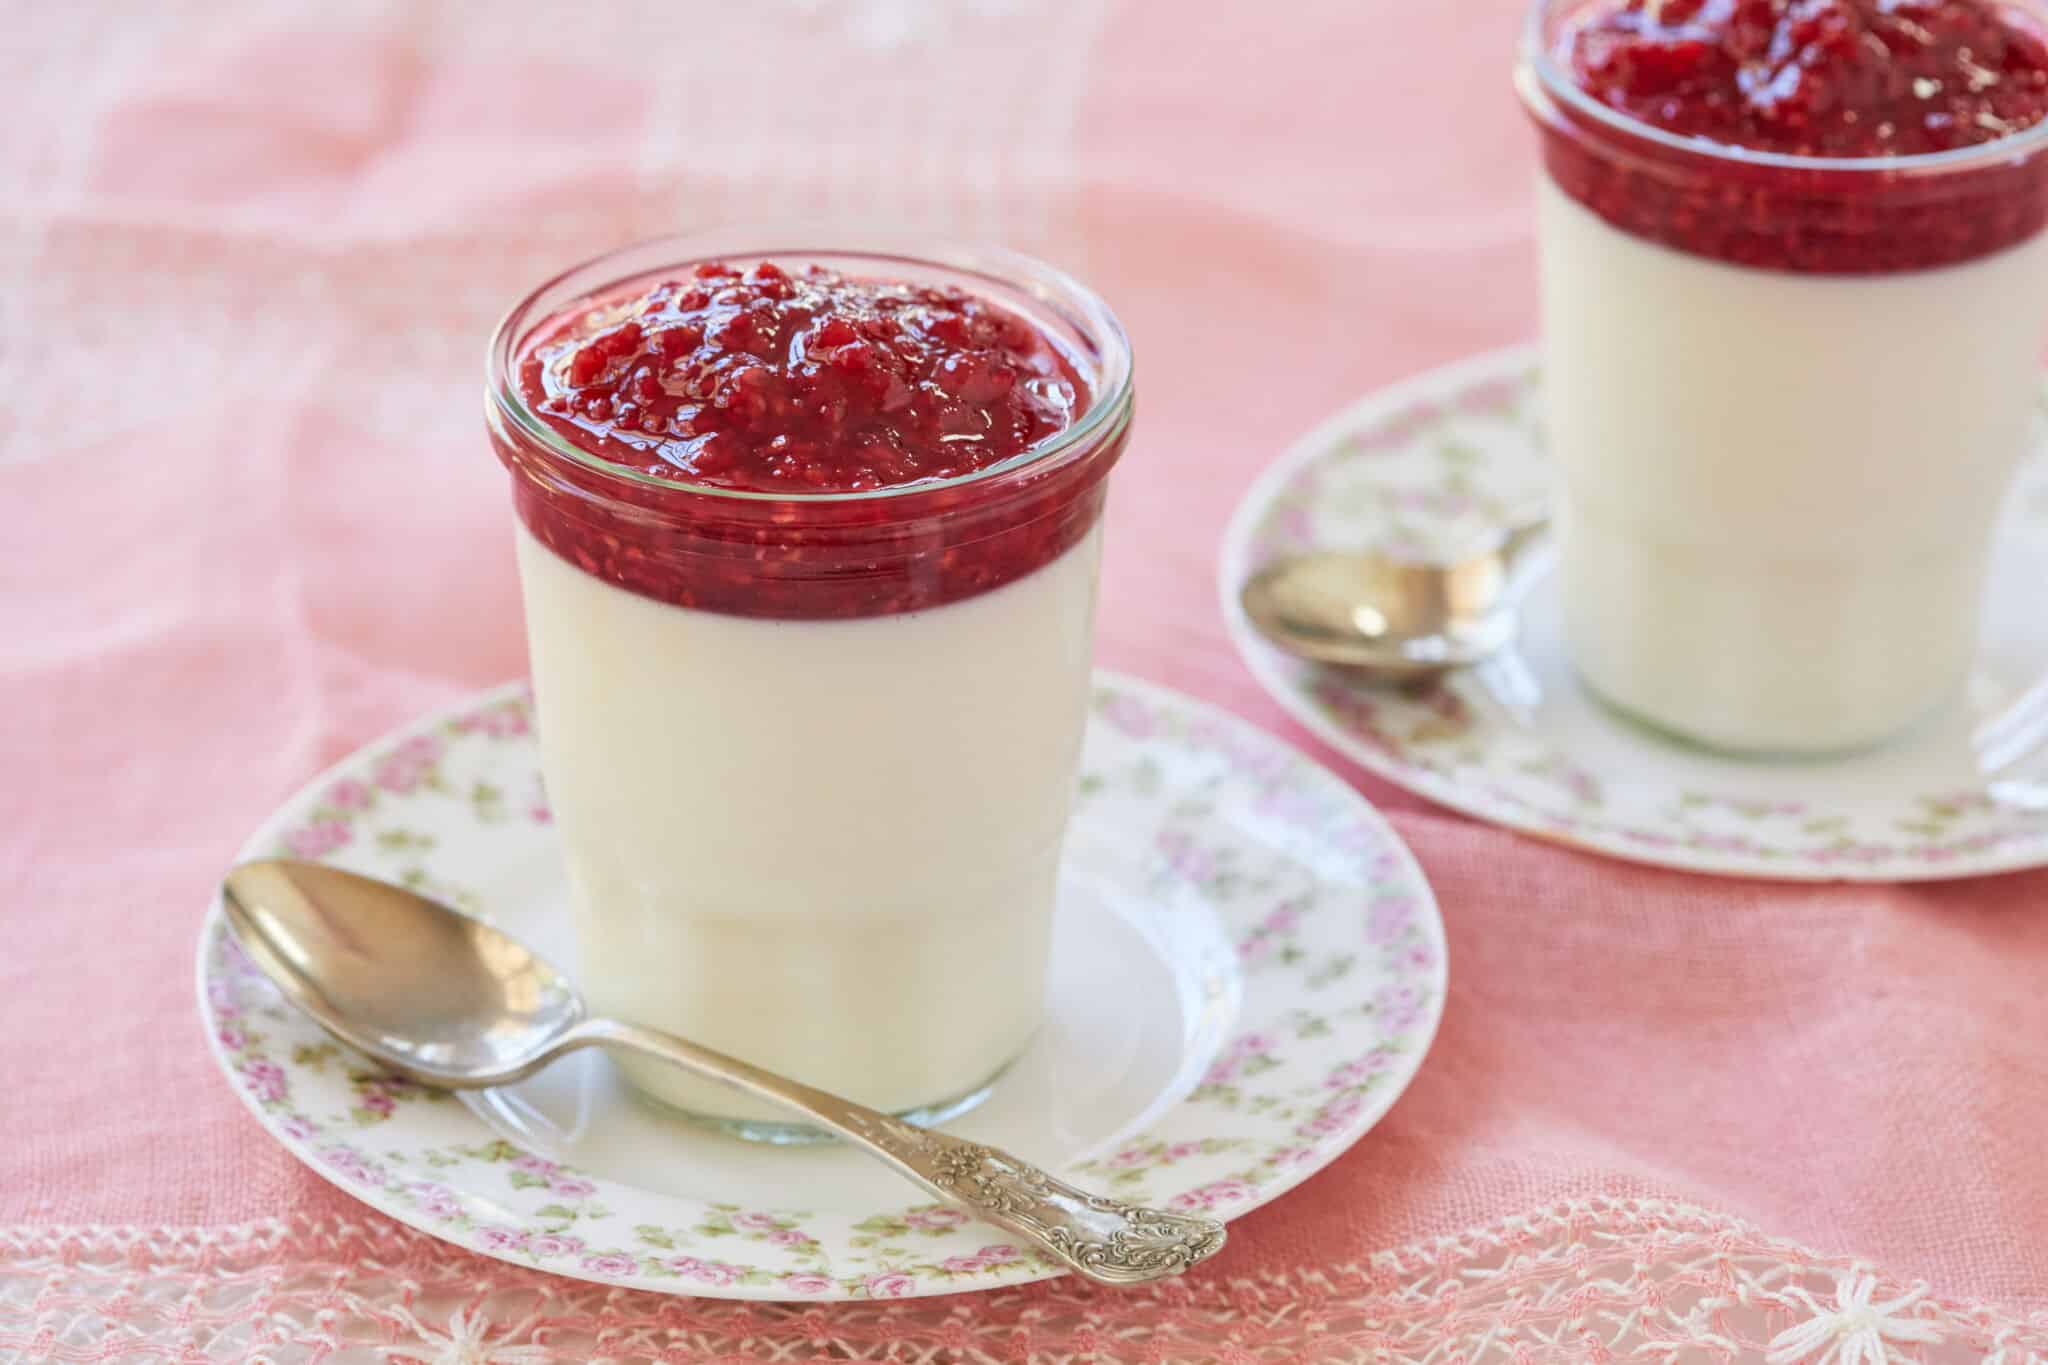 The white silky smooth buttermilk Panna Cotta is topped with glossy vibrant red raspberry jam, served in a mason jar on a floral plate with a vintage dessert spoon.